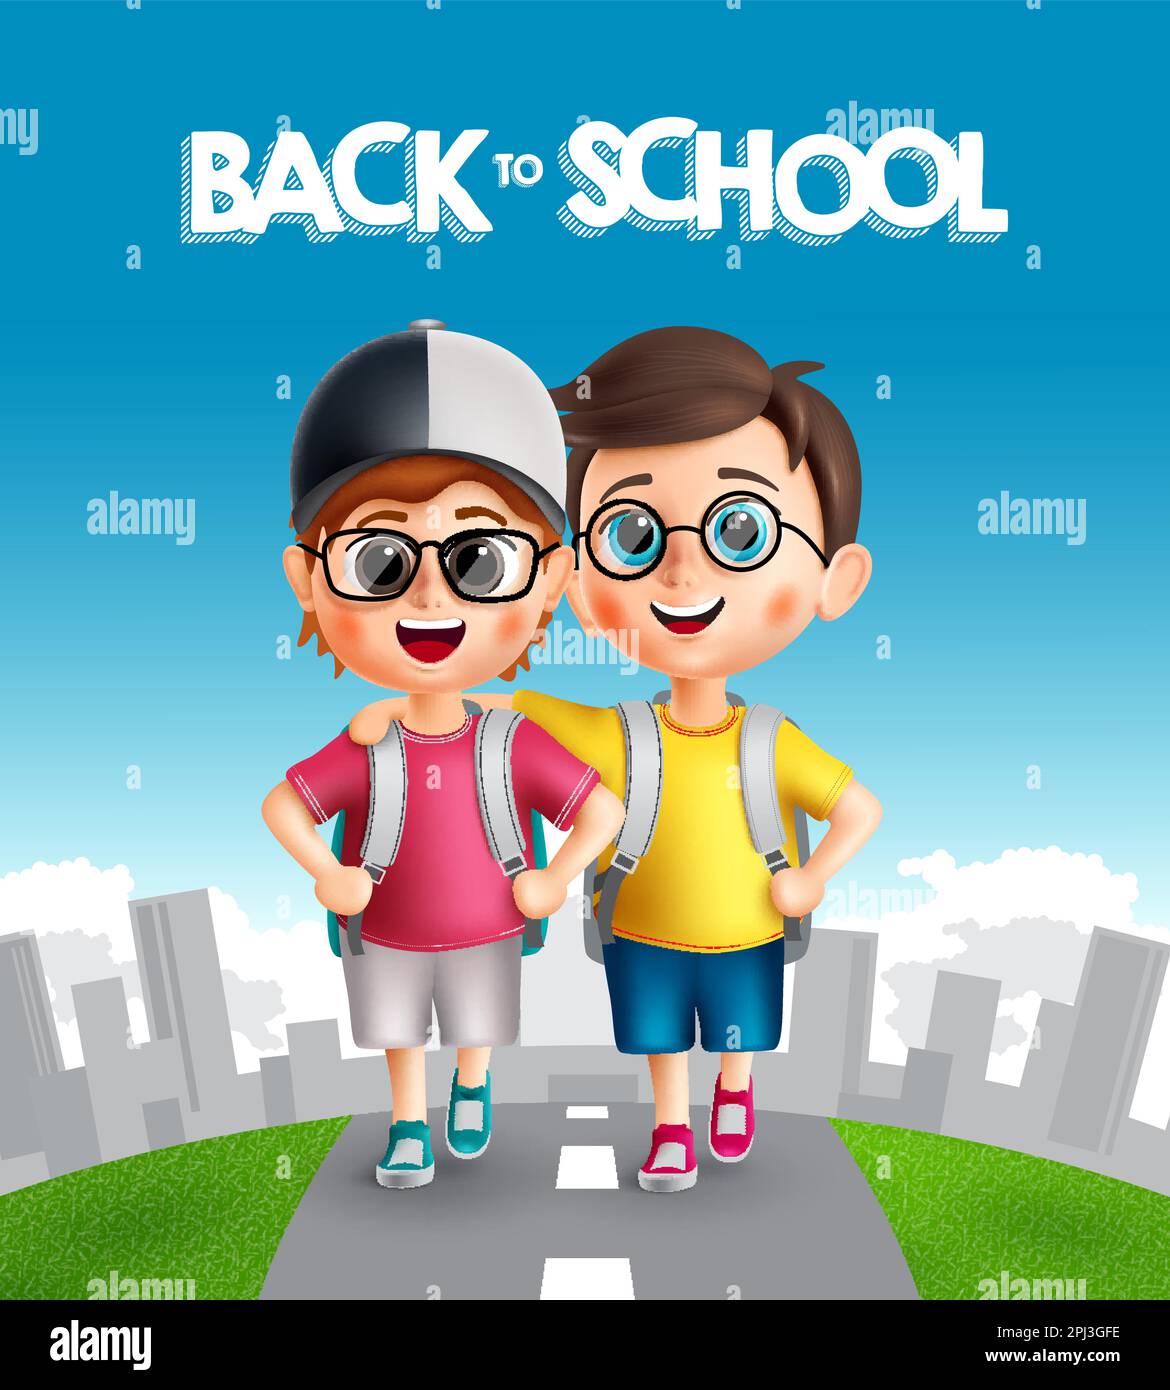 Back to school vector design. Back to school text with student boy characters walking outdoor. Vector illustration student characters background. Stock Vector